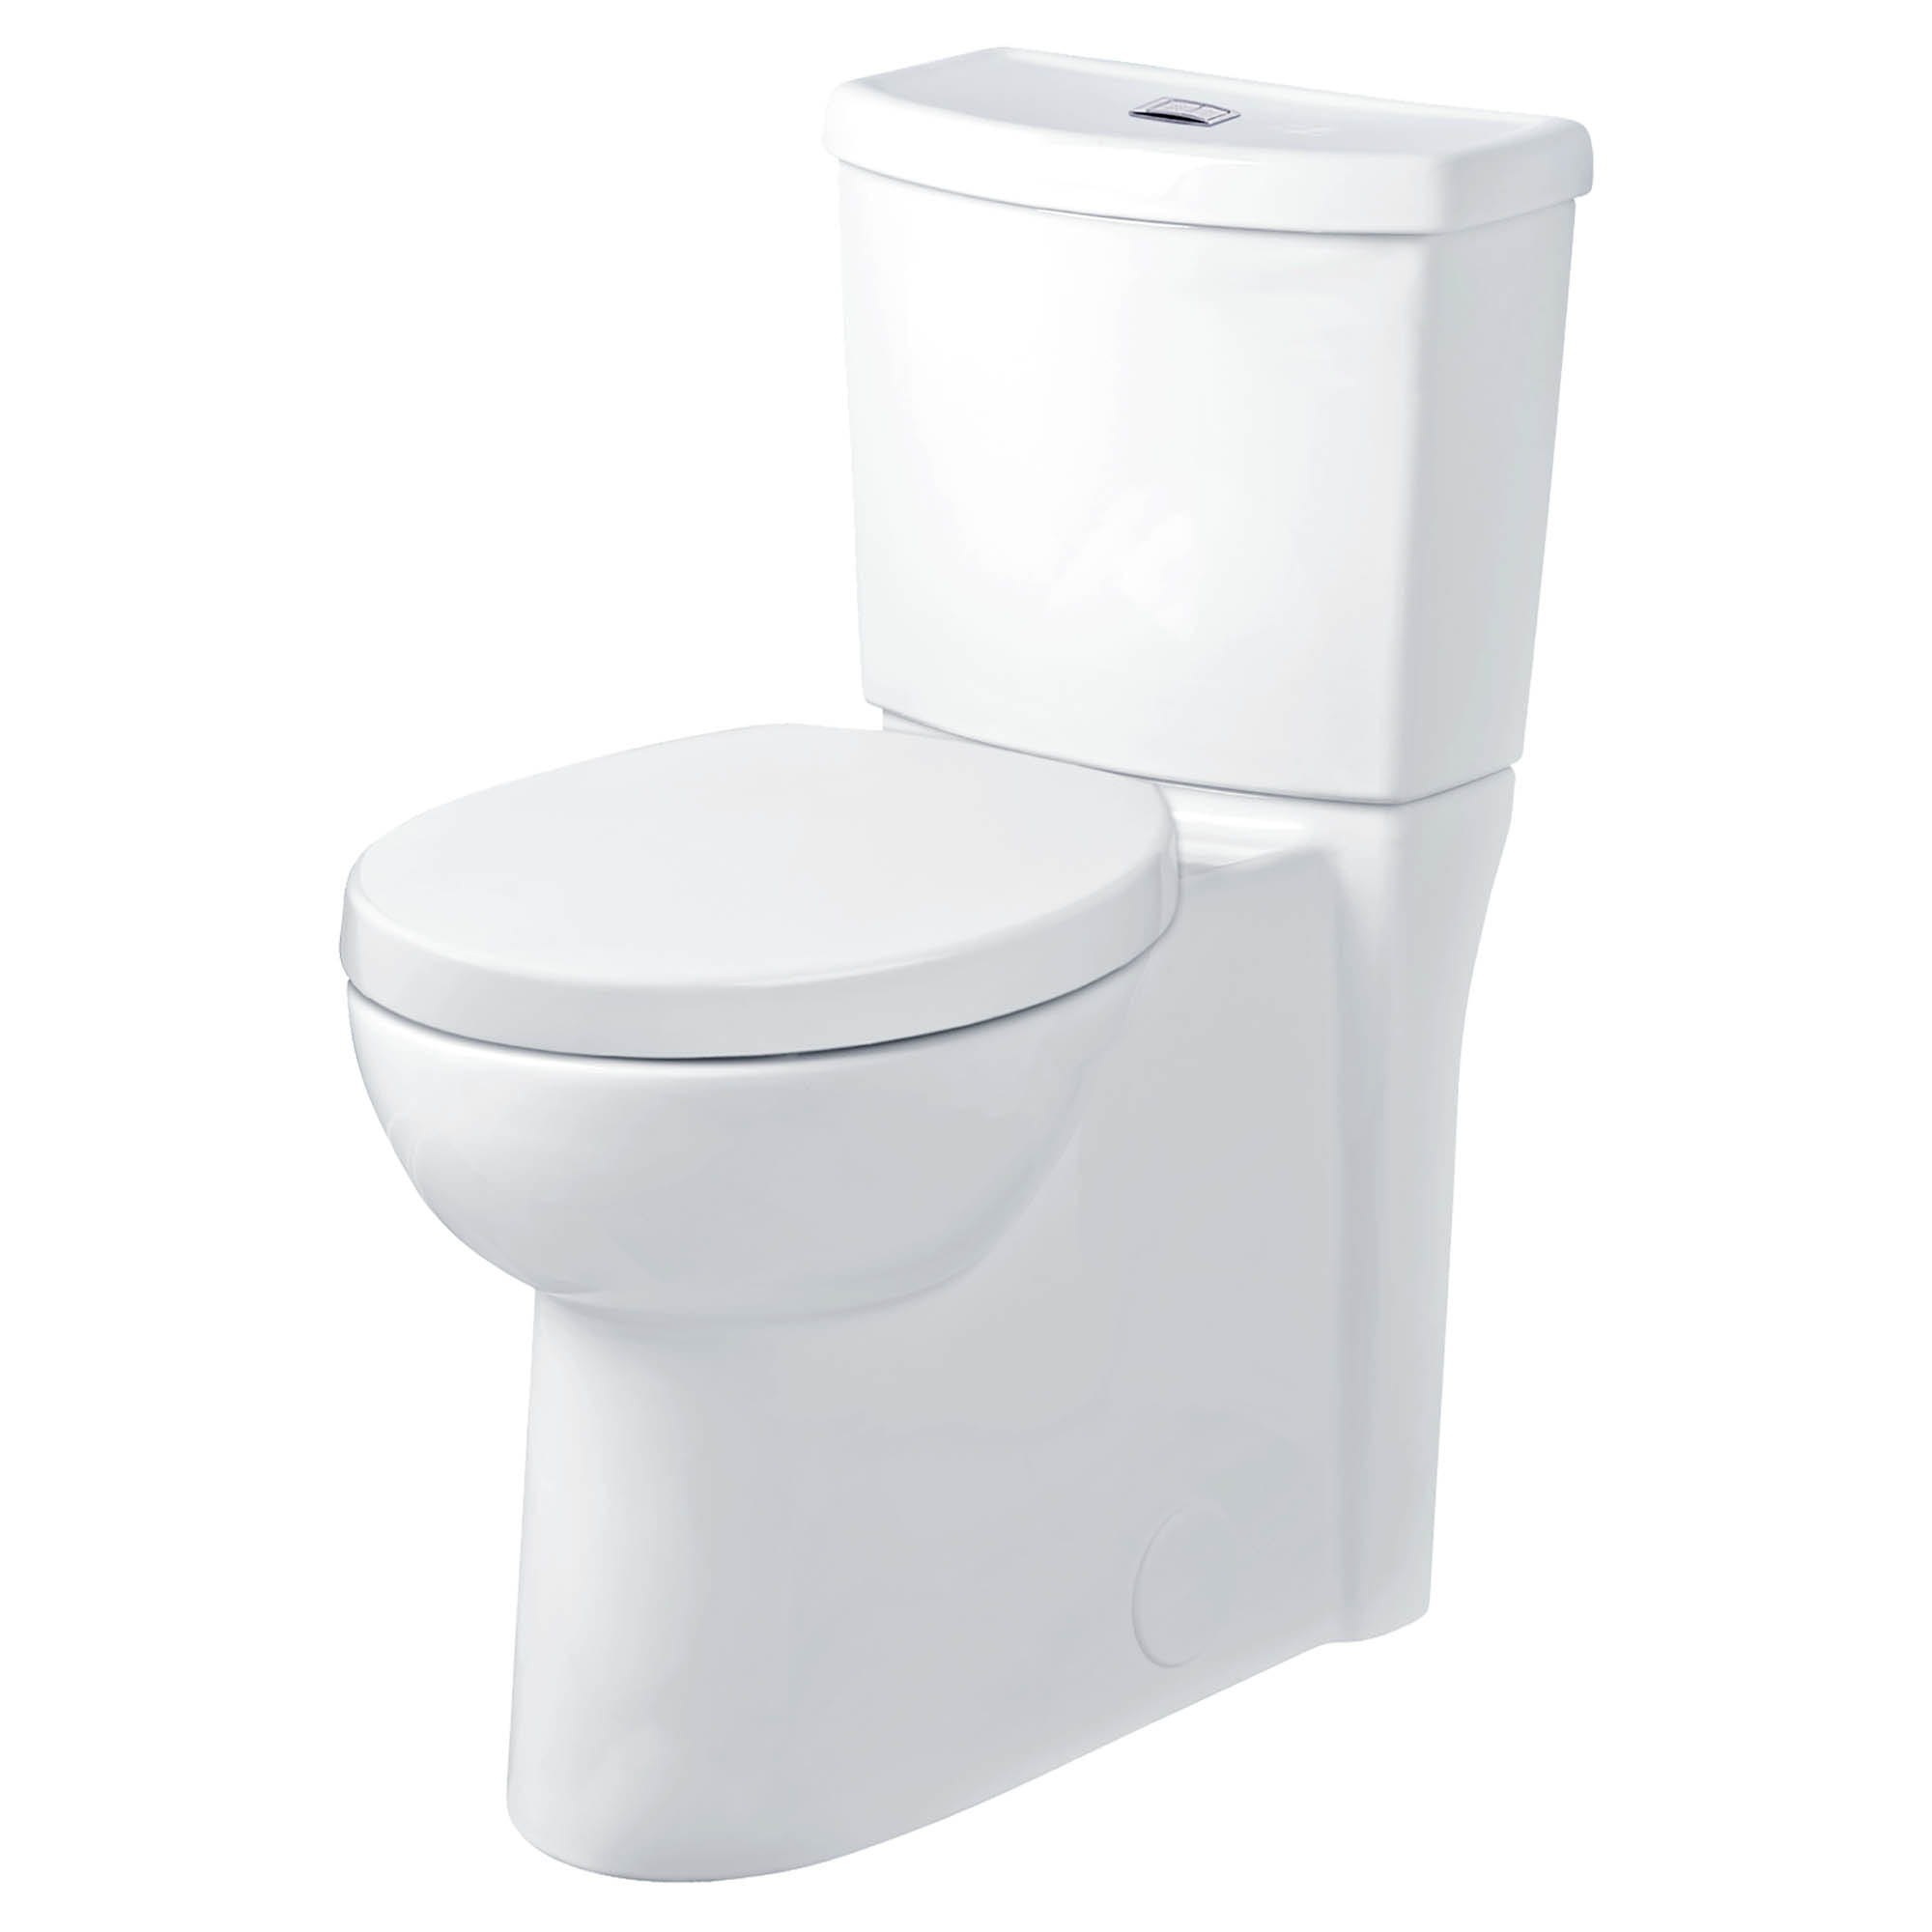 Studio Skirted Two-Piece Dual Flush 1.6 gpf/6.0 Lpf and 1.1 gpf/4.2 Lpf Chair Height Round Front Toilet With Seat